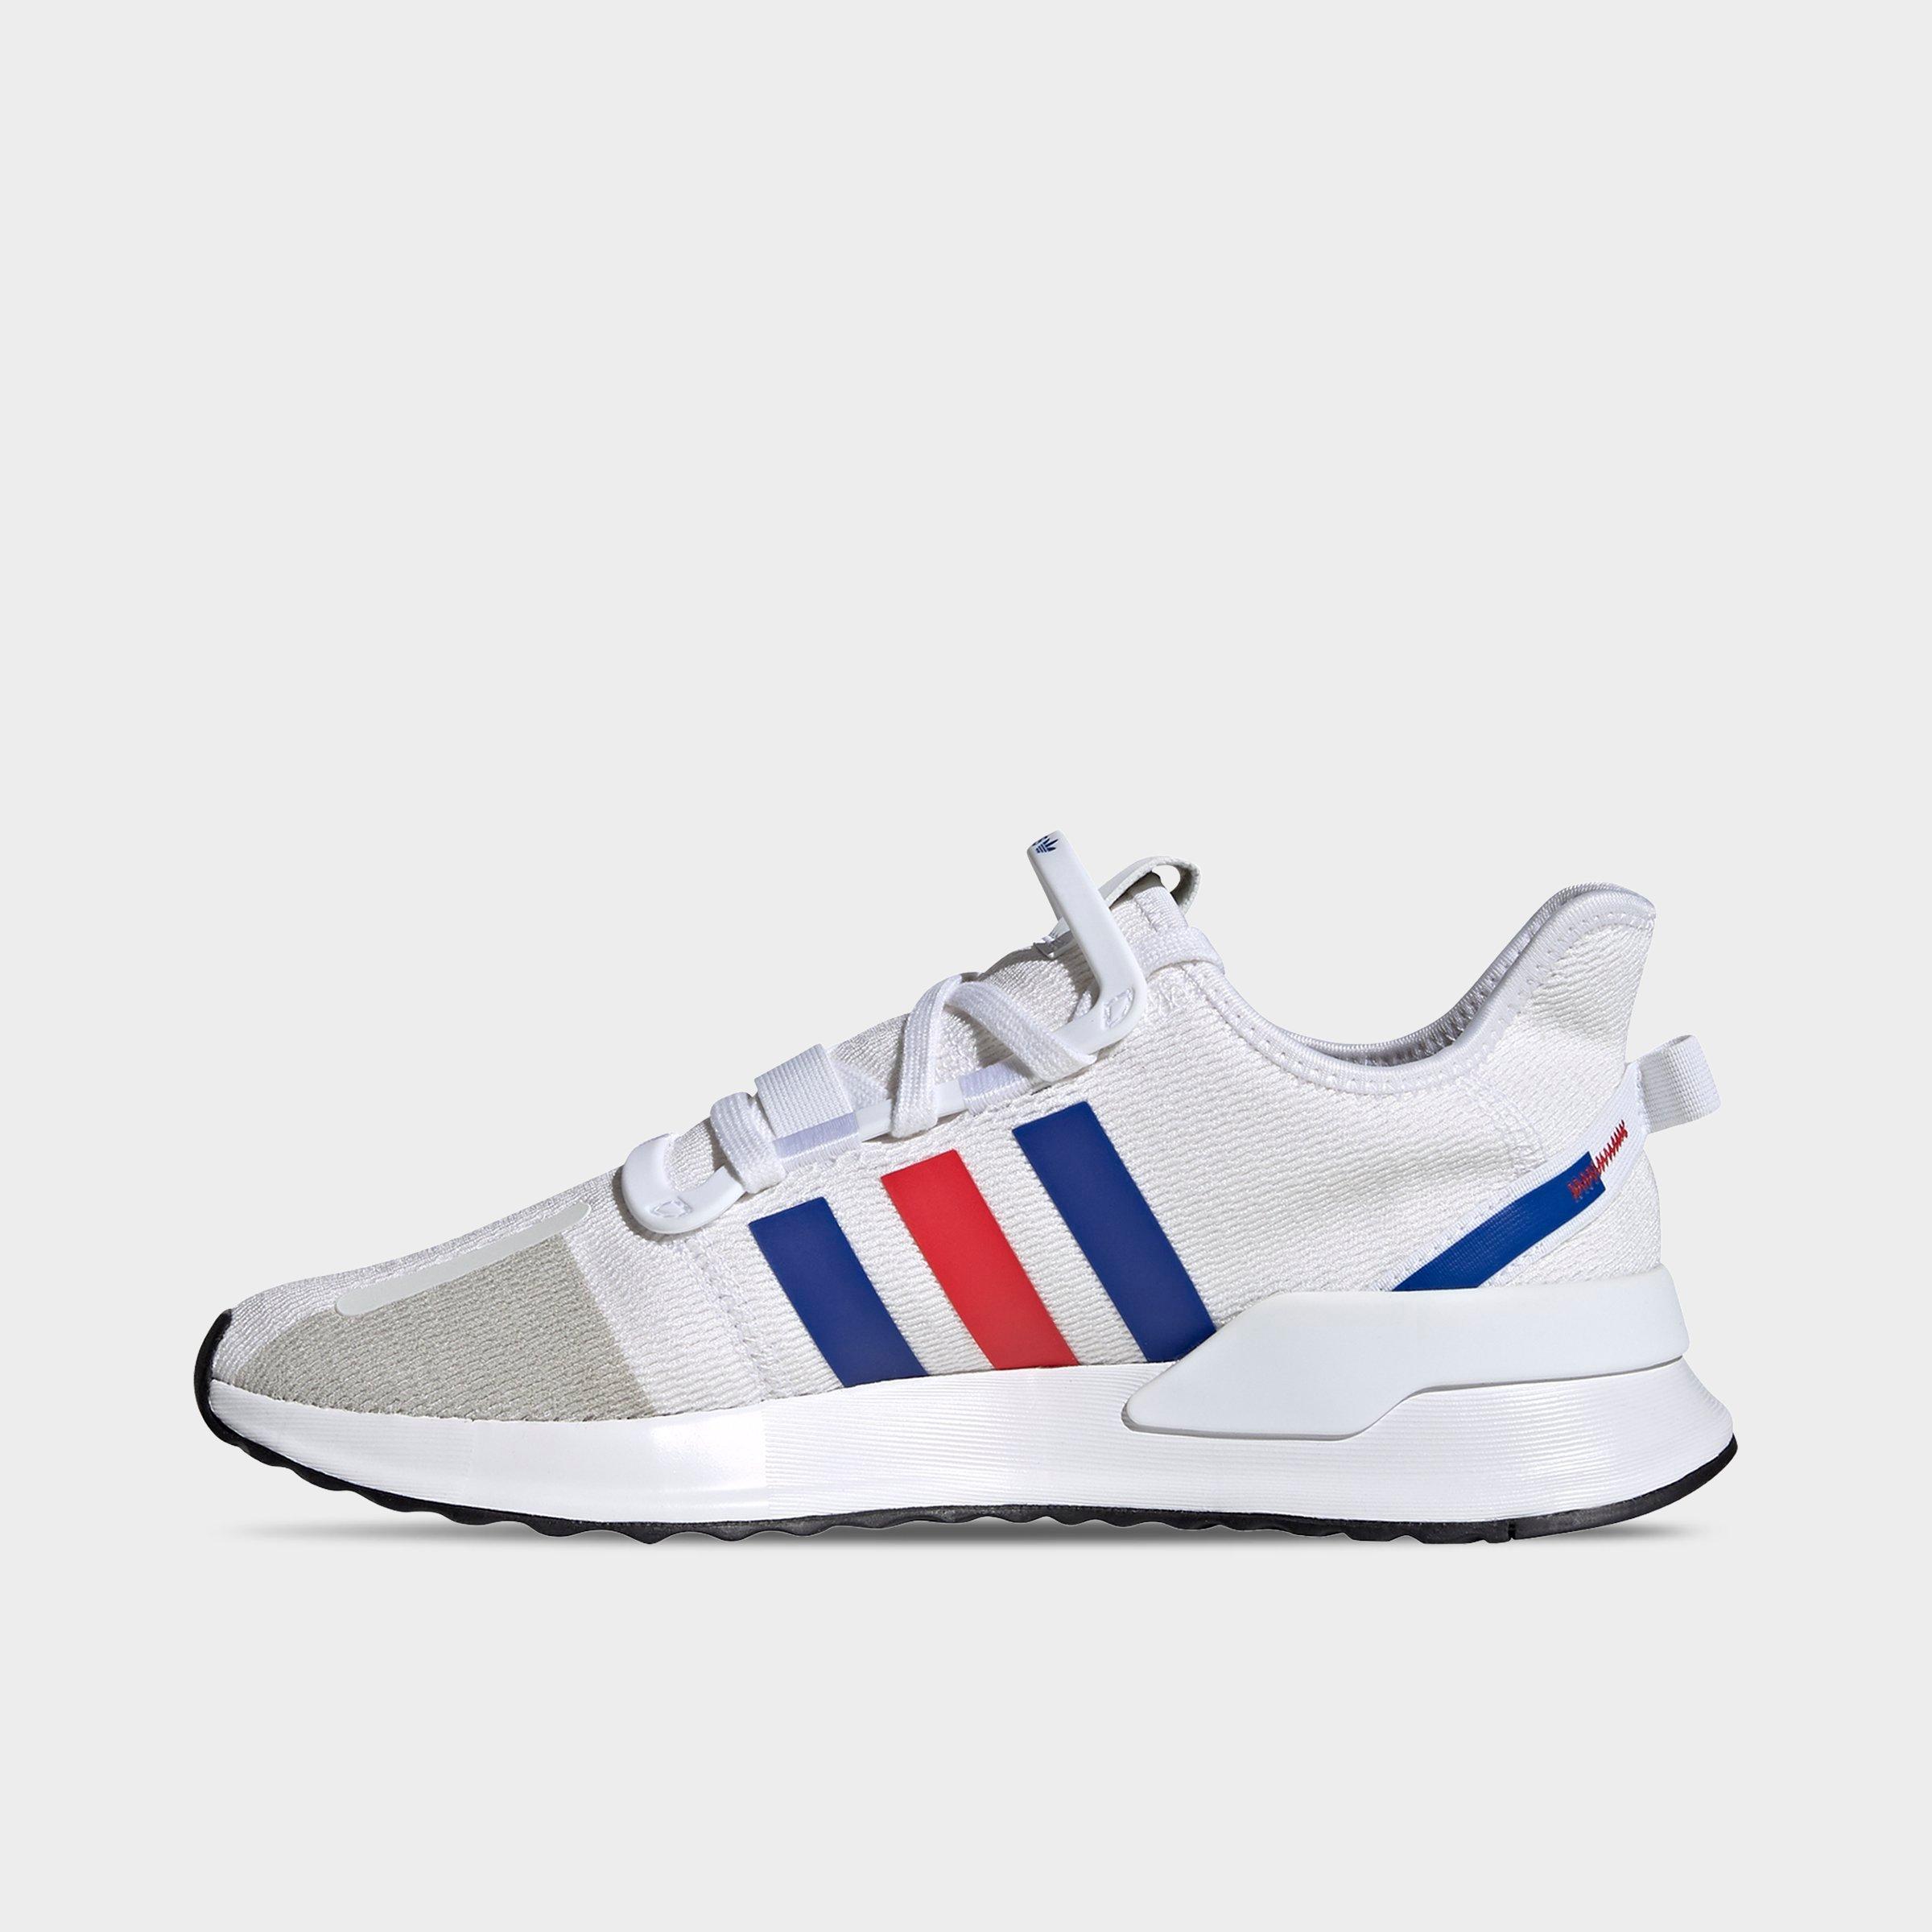 red and blue adidas shoes